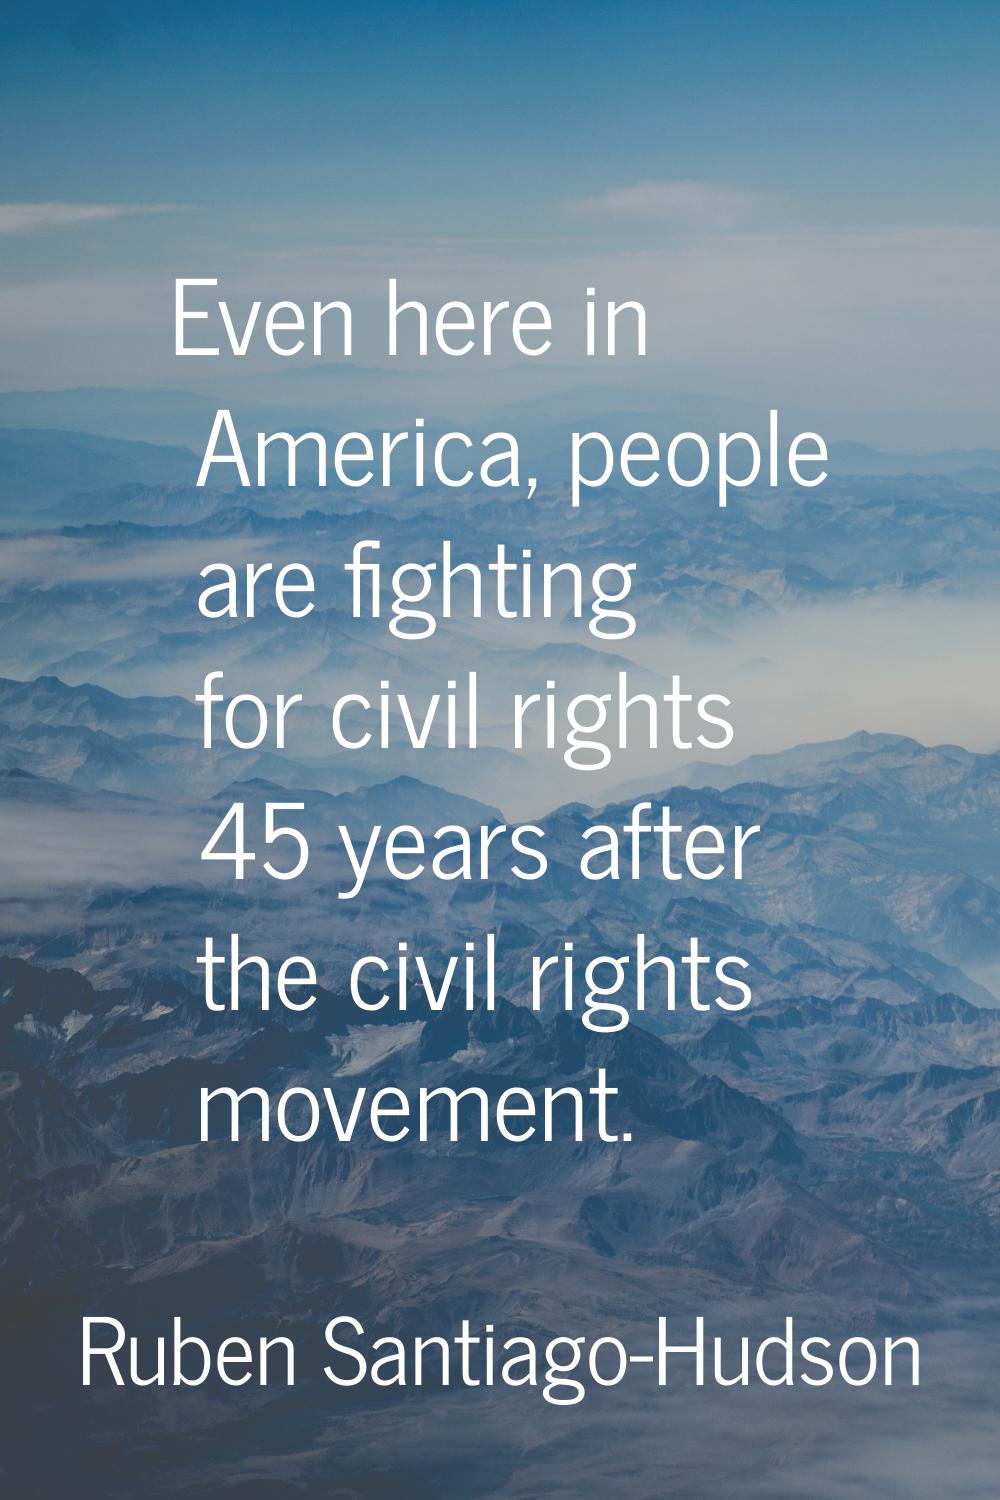 Even here in America, people are fighting for civil rights 45 years after the civil rights movement